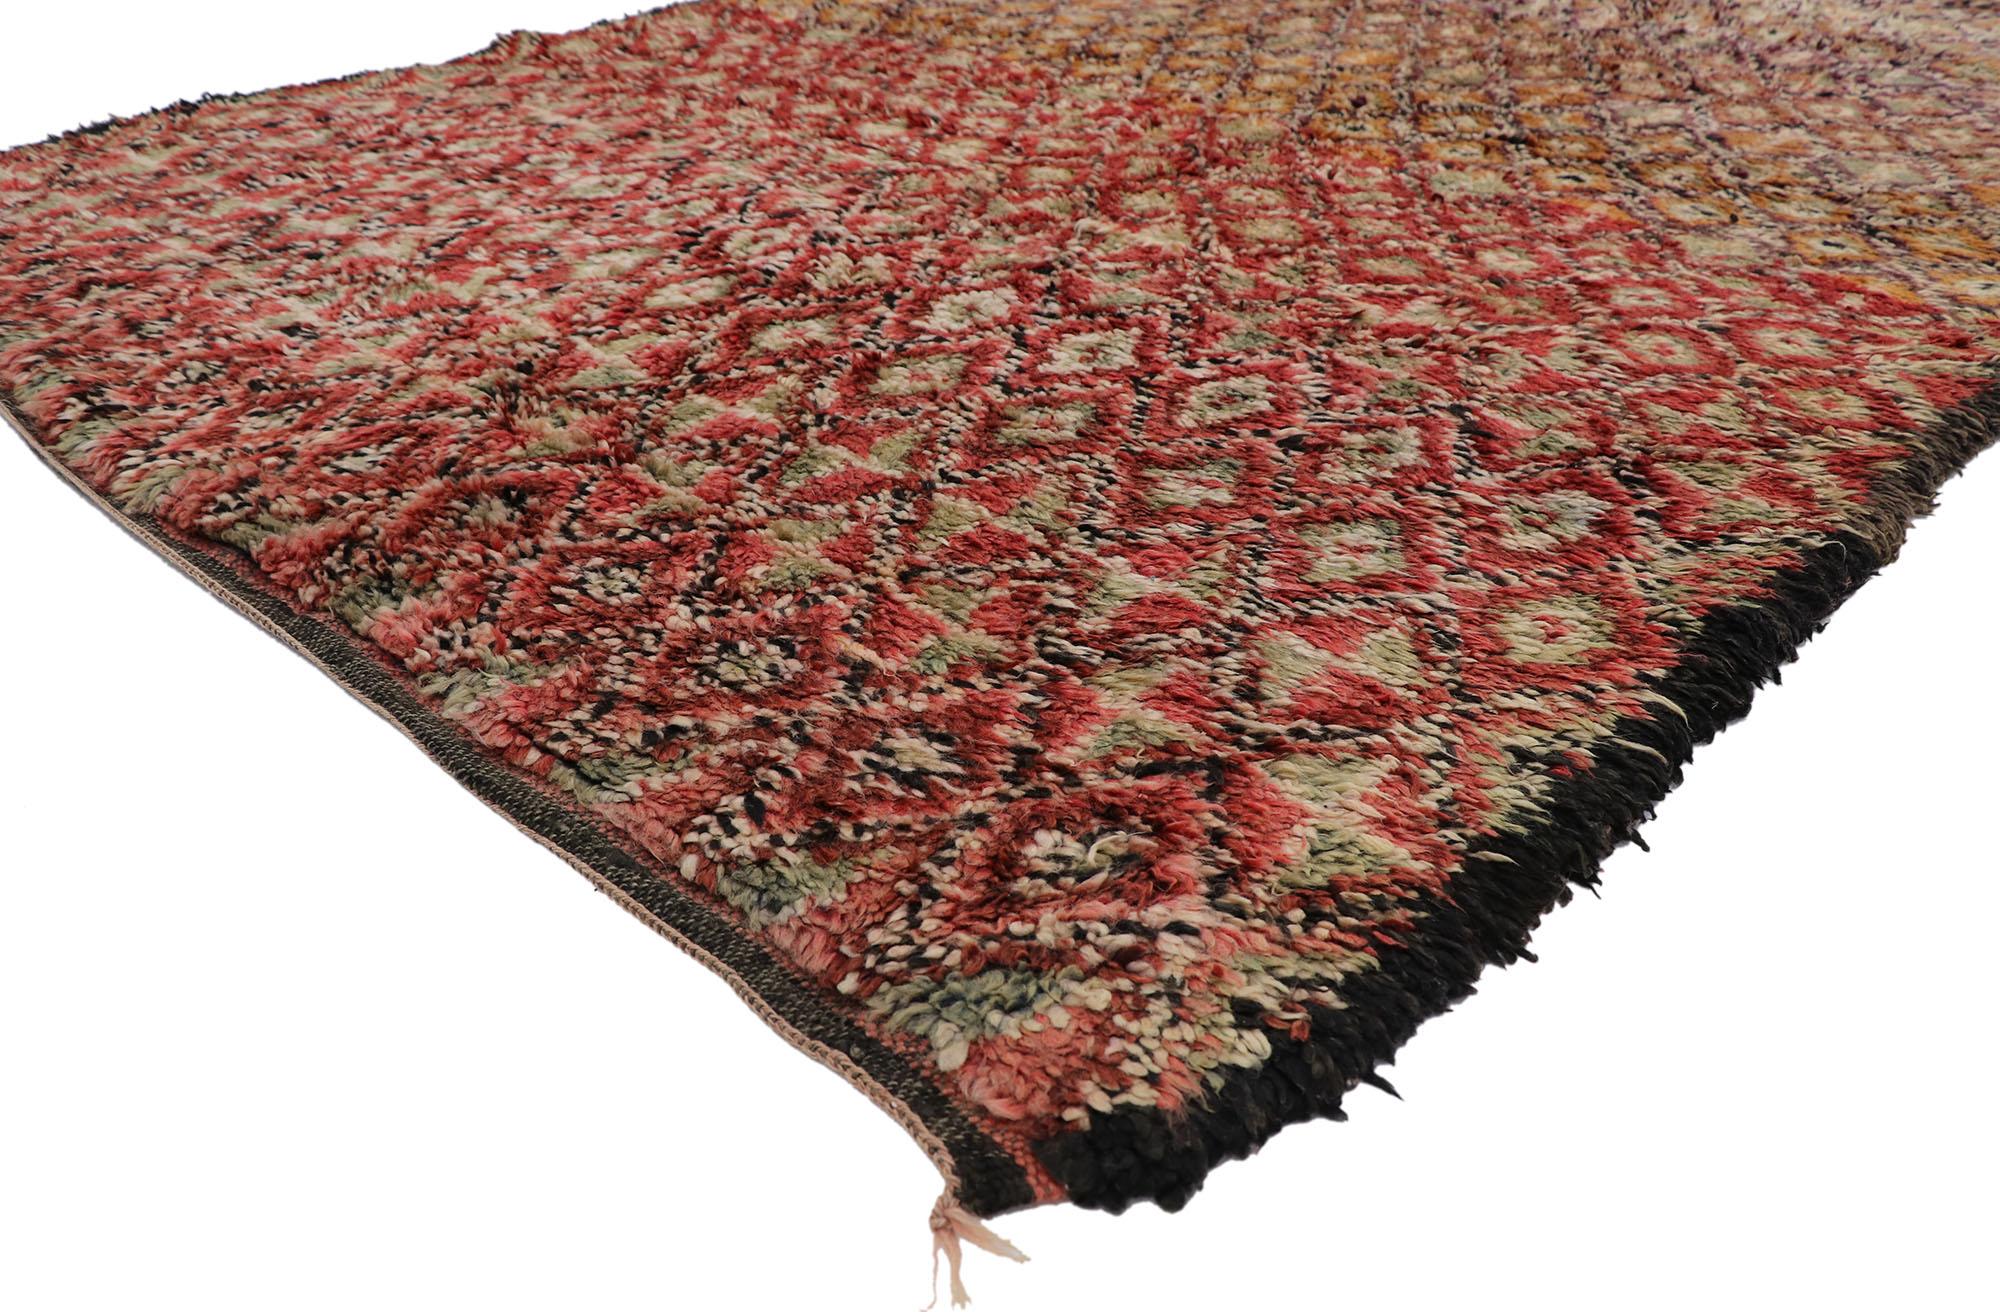 21225 Vintage Berber Beni M'Guild Moroccan rug 06'03 x 09'03. Warm and inviting, this hand-knotted wool vintage Berber Beni M'Guild Moroccan rug is a captivating vision of woven beauty. The abrashed field features an all-over diamond trellis